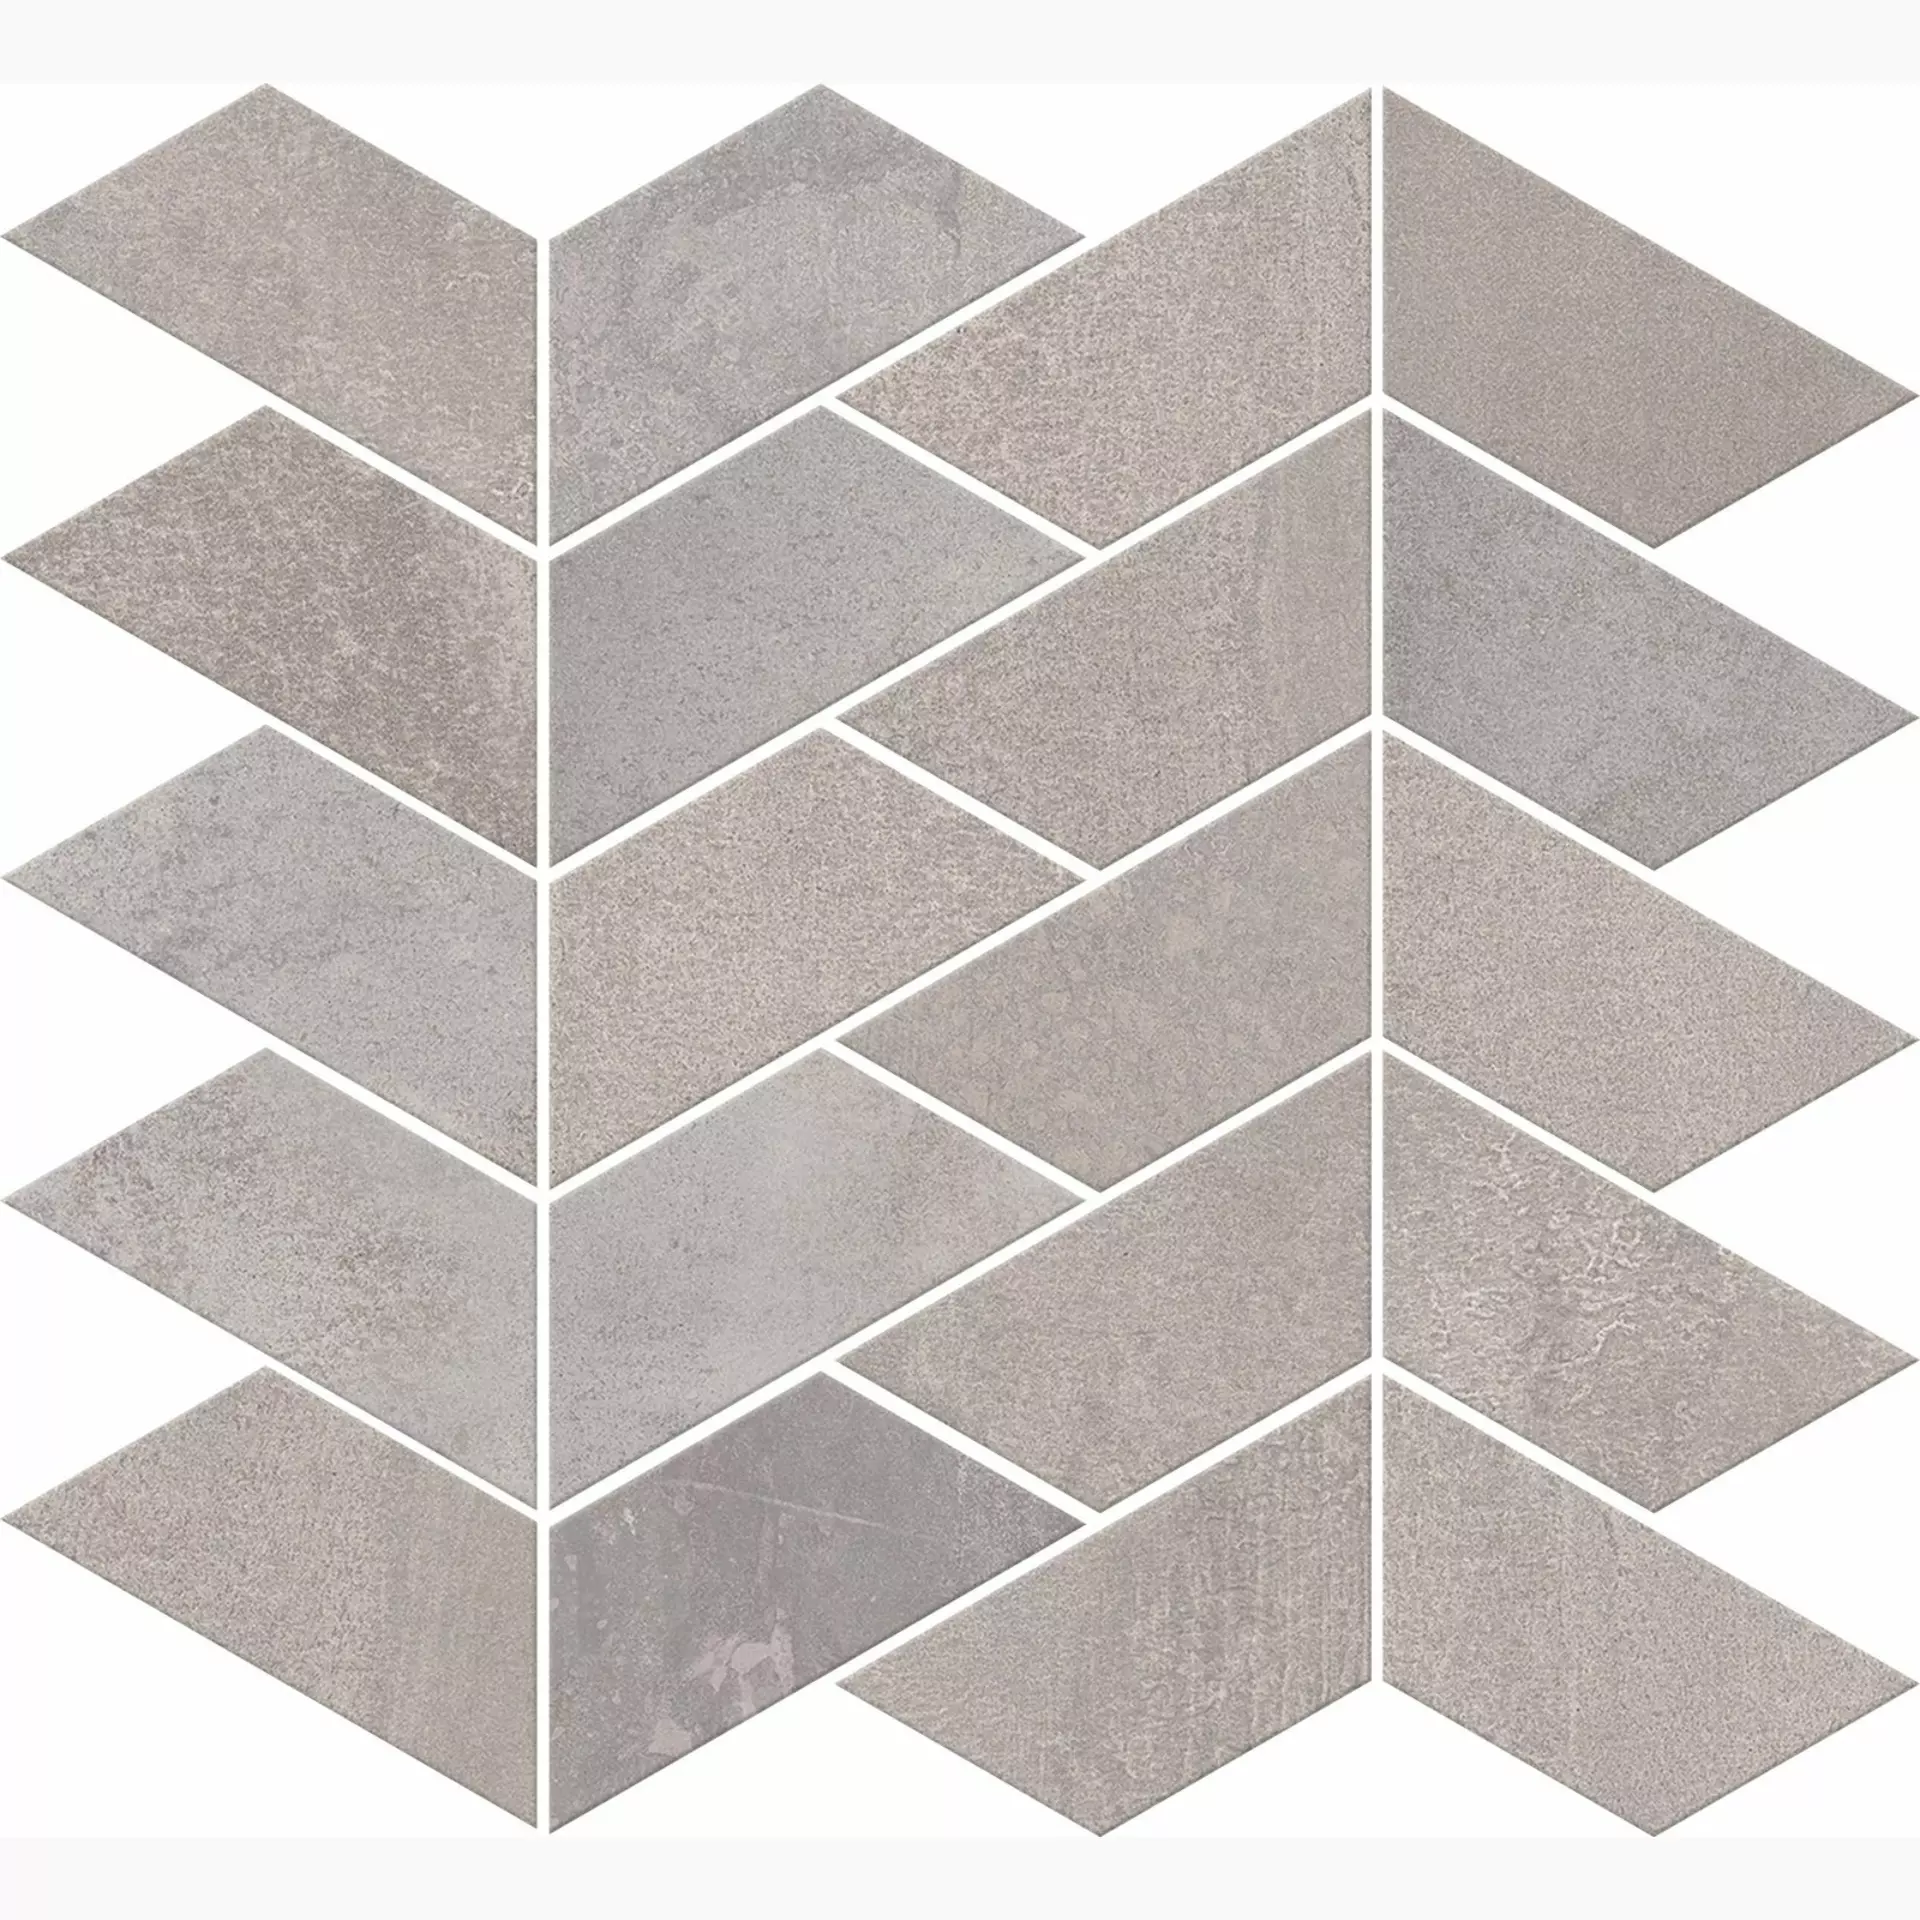 ABK Interno9 Wide Silver Naturale Mosaic Versus PF60000963 29x30cm rectified 7mm